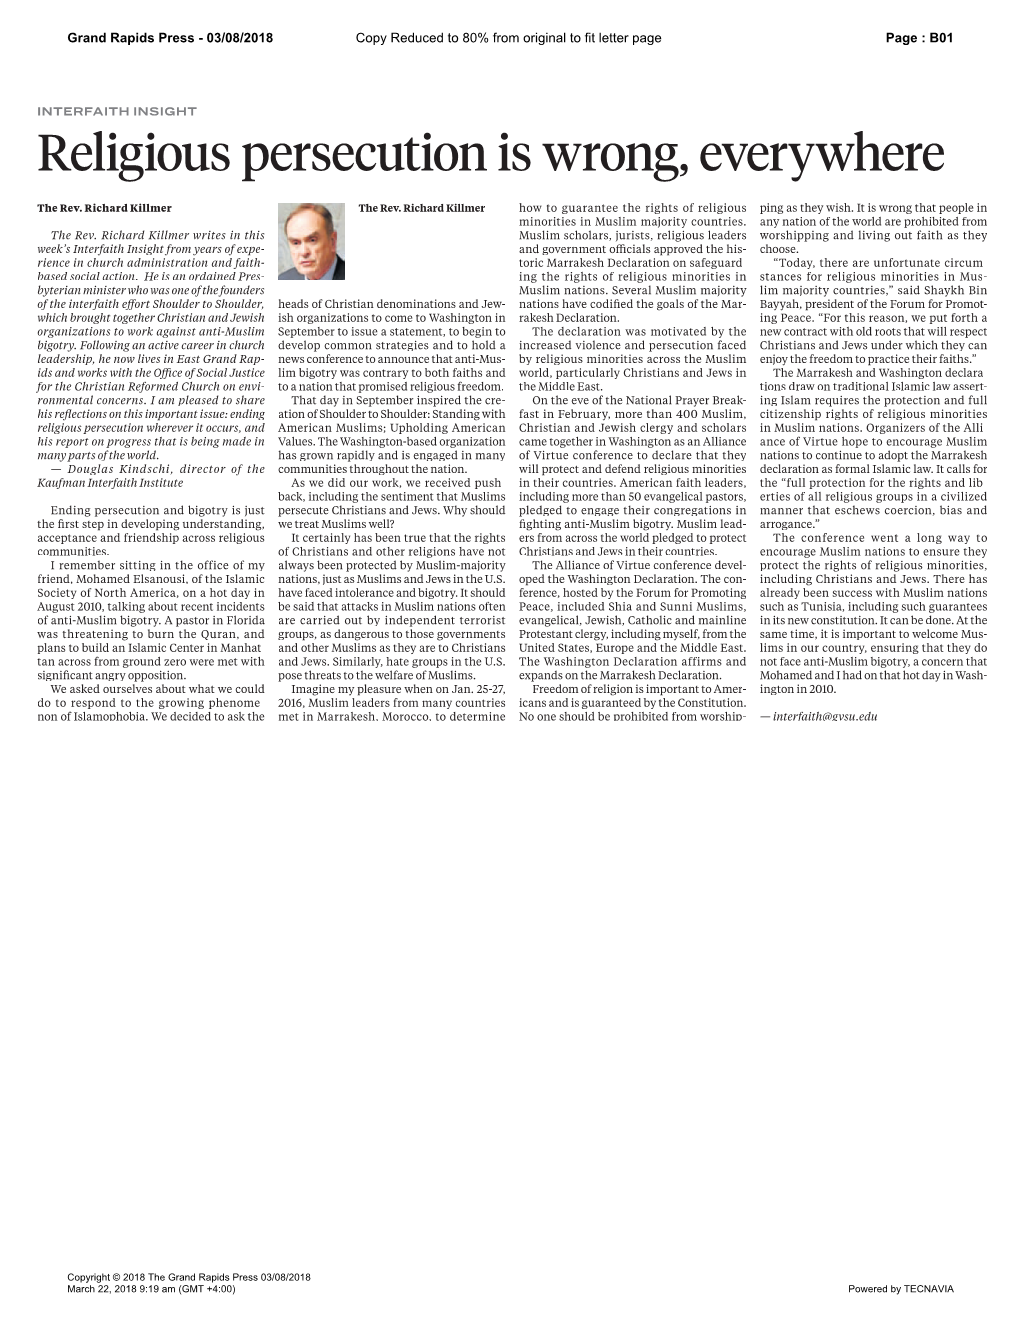 Religious Persecution Is Wrong, Everywhere